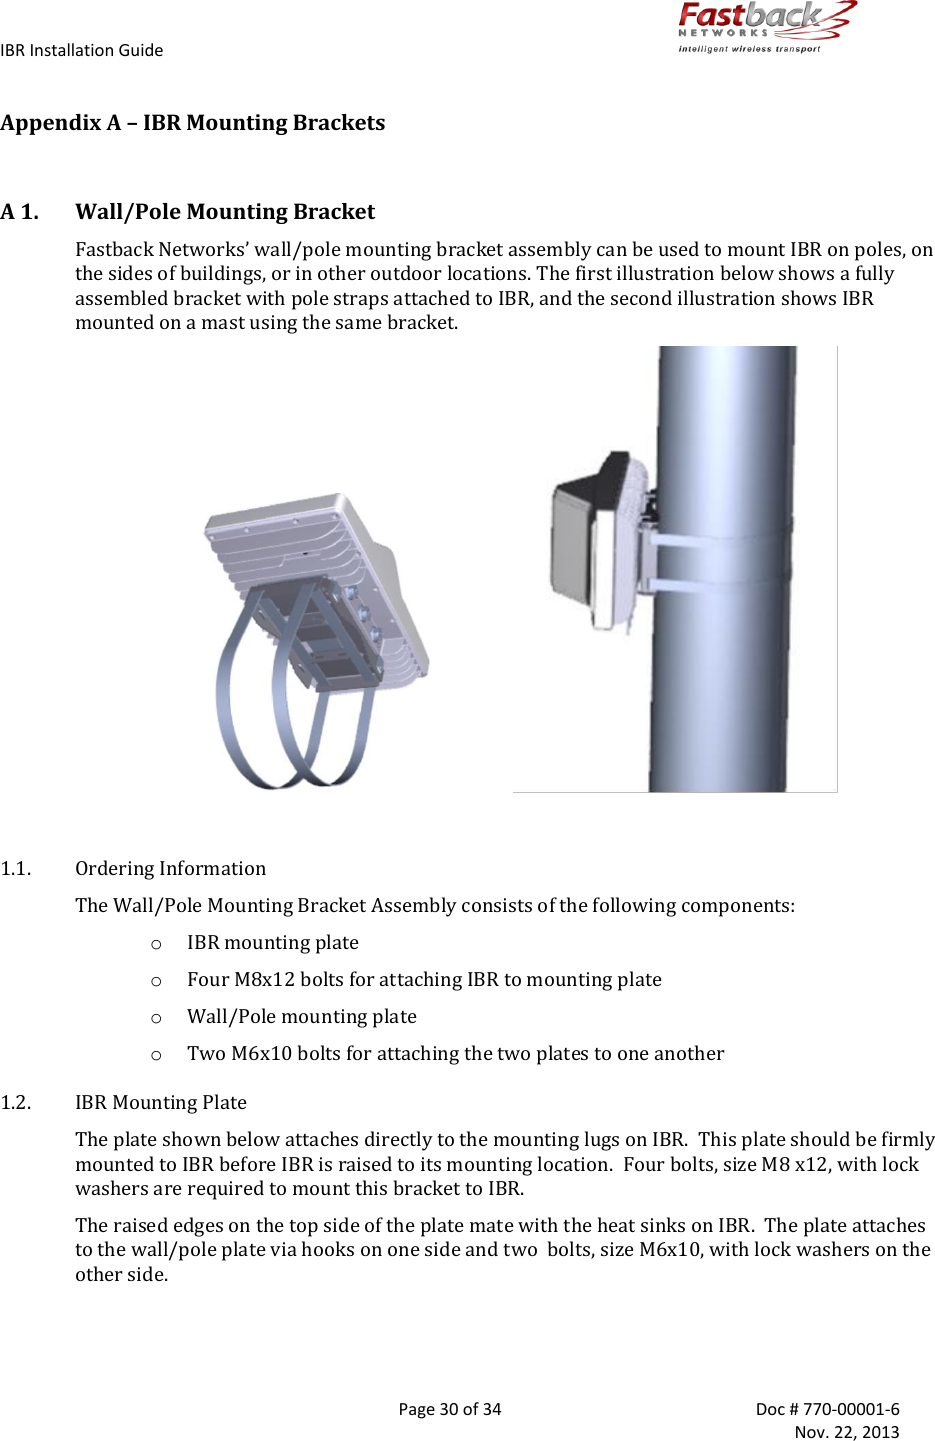 IBR Installation Guide        Page 30 of 34  Doc # 770-00001-6     Nov. 22, 2013   Appendix A – IBR Mounting Brackets  A 1. Wall/Pole Mounting Bracket Fastback Networks’ wall/pole mounting bracket assembly can be used to mount IBR on poles, on the sides of buildings, or in other outdoor locations. The first illustration below shows a fully assembled bracket with pole straps attached to IBR, and the second illustration shows IBR mounted on a mast using the same bracket.                                                1.1. Ordering Information The Wall/Pole Mounting Bracket Assembly consists of the following components: o IBR mounting plate  o Four M8x12 bolts for attaching IBR to mounting plate o Wall/Pole mounting plate o Two M6x10 bolts for attaching the two plates to one another 1.2. IBR Mounting Plate The plate shown below attaches directly to the mounting lugs on IBR.  This plate should be firmly mounted to IBR before IBR is raised to its mounting location.  Four bolts, size M8 x12, with lock washers are required to mount this bracket to IBR. The raised edges on the top side of the plate mate with the heat sinks on IBR.  The plate attaches to the wall/pole plate via hooks on one side and two  bolts, size M6x10, with lock washers on the other side.   